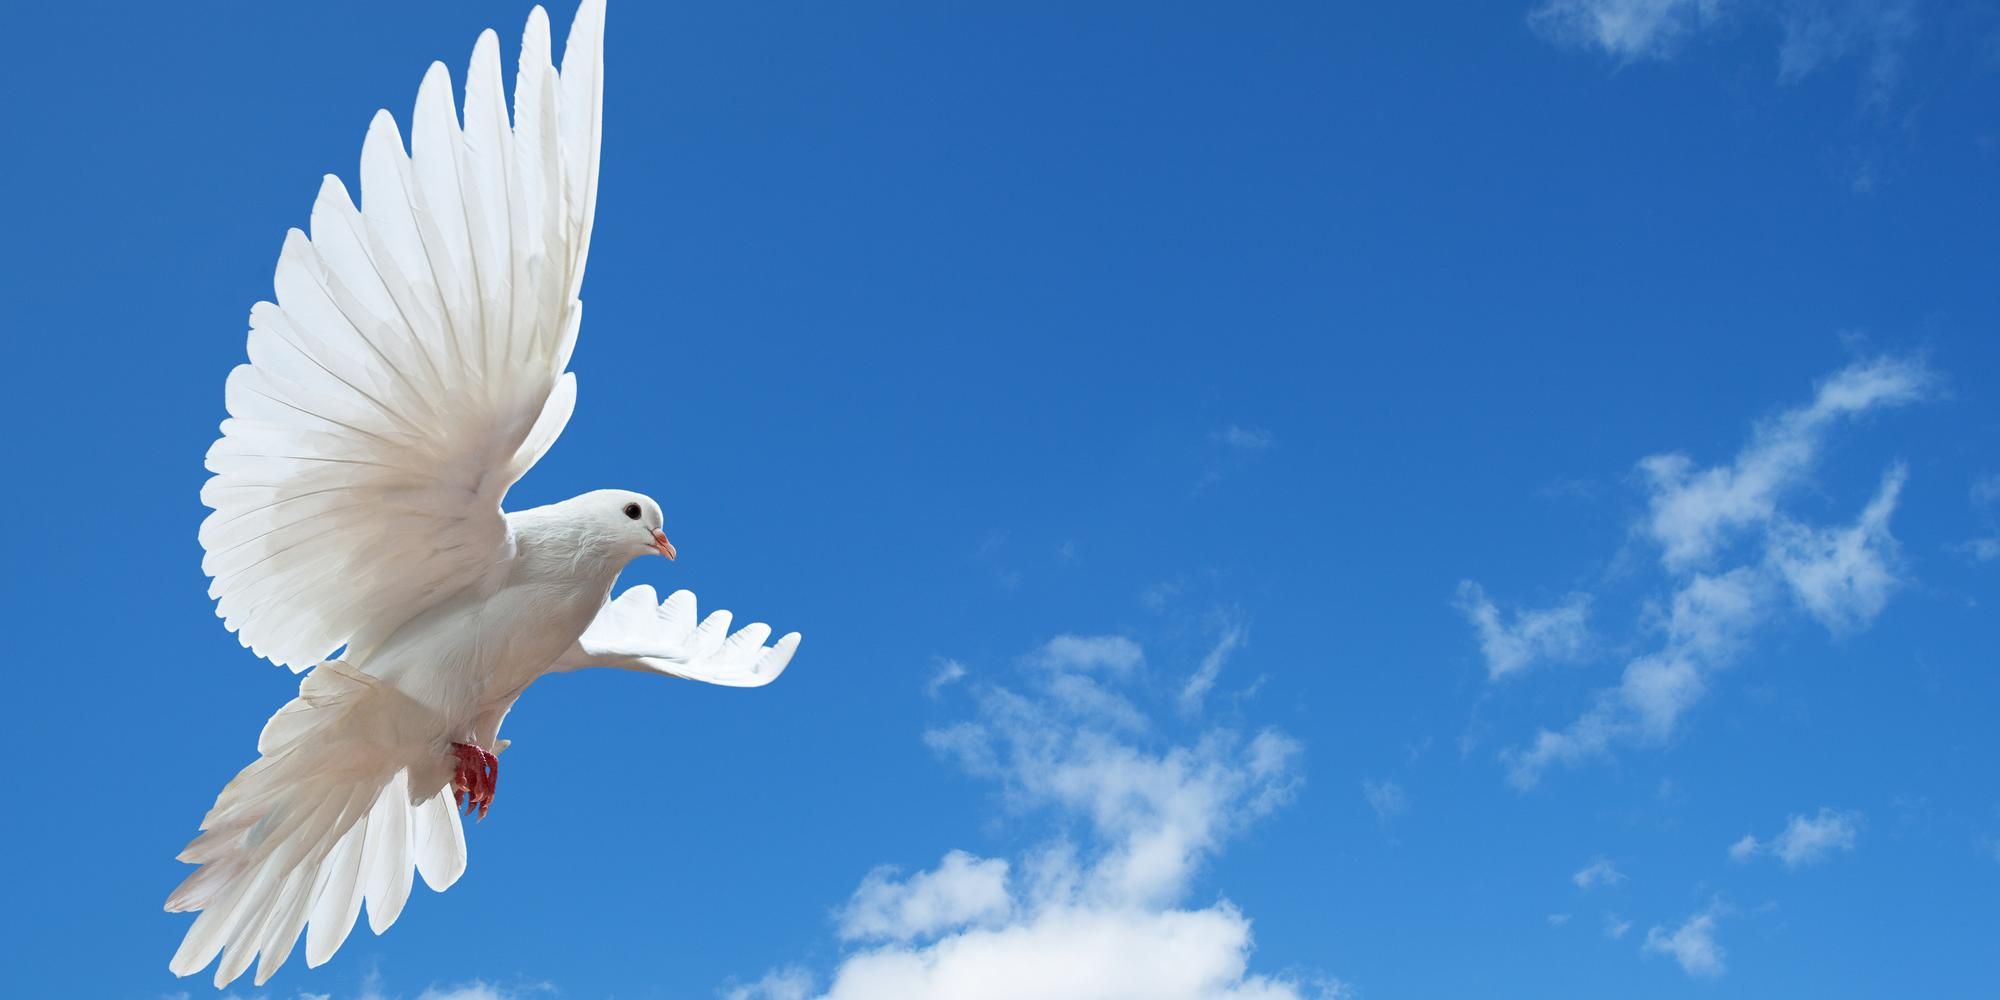 5 Pieces Of Little Known Dove Trivia A Sign Of Peace White Dove Releases